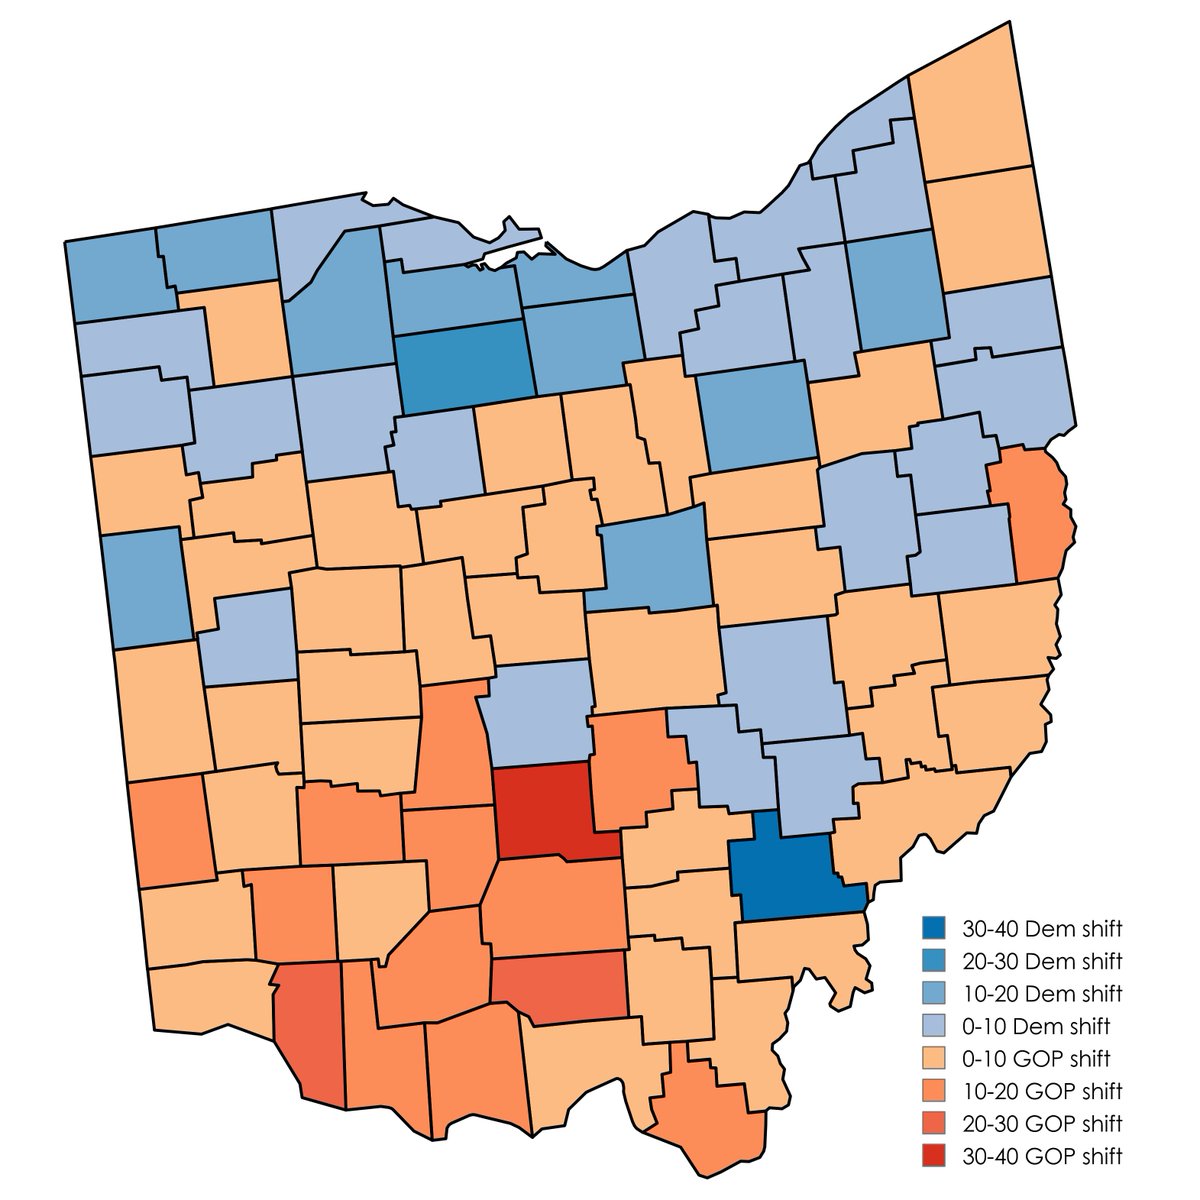 #ElectionTwitter Here's a map comparing the results by county in Ohio between the 1956 and 1972 presidential elections. Democrats improved in urban & industrial areas, majority-Catholic counties and college towns, while rural southern Ohio swung to the GOP.